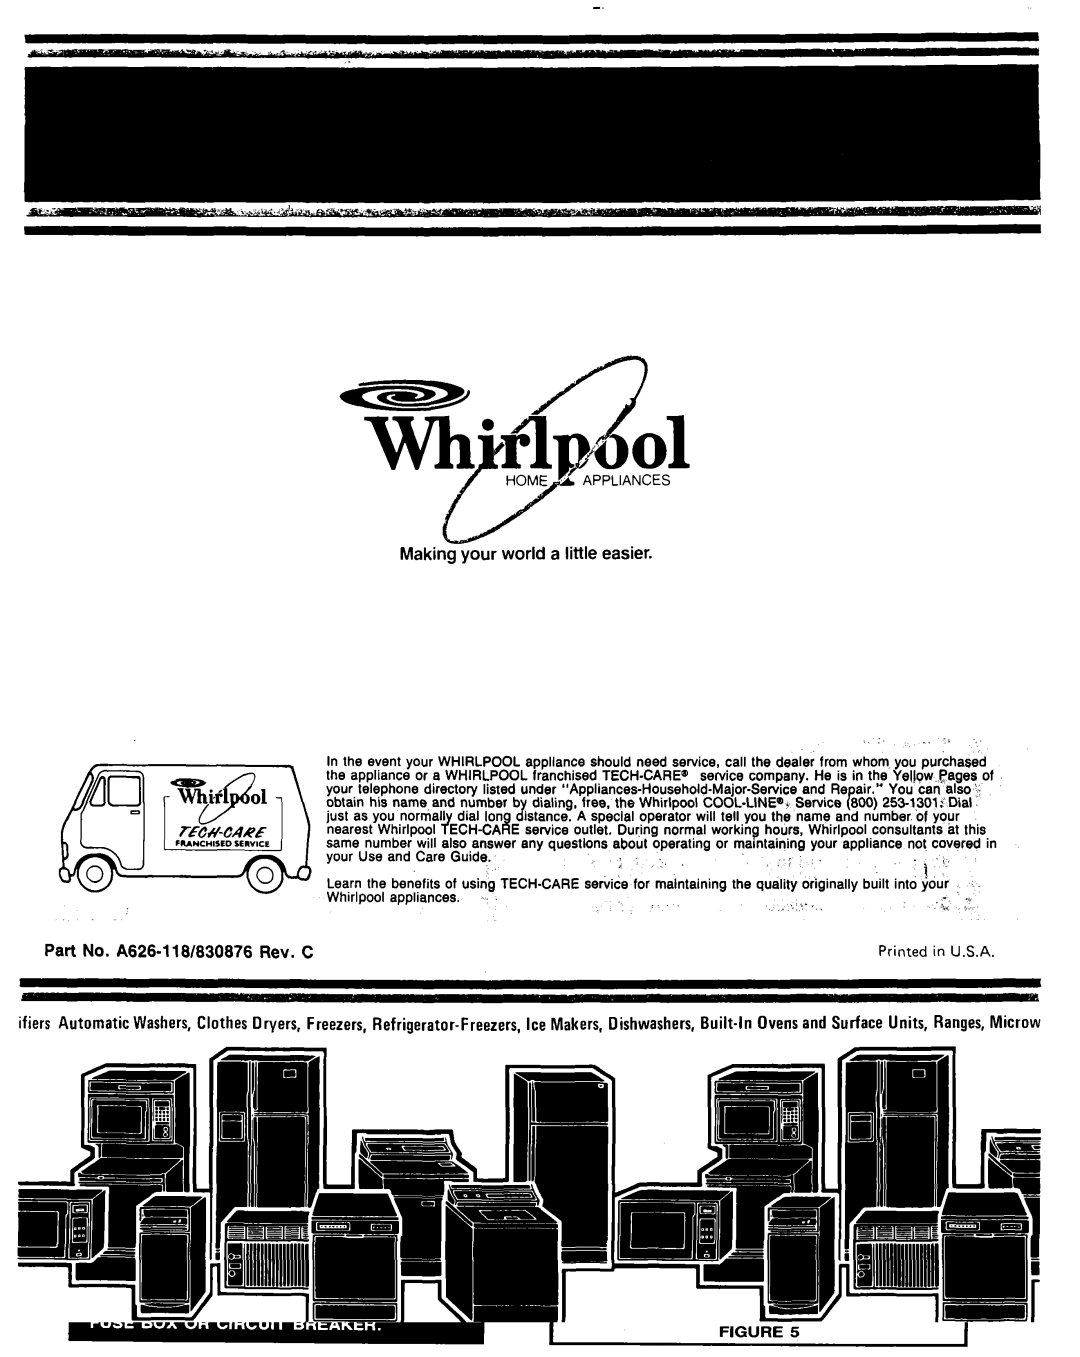 Whirlpool RH6330XL manual Making your world a little easier, Part No. A626-118/830876 Rev. C 